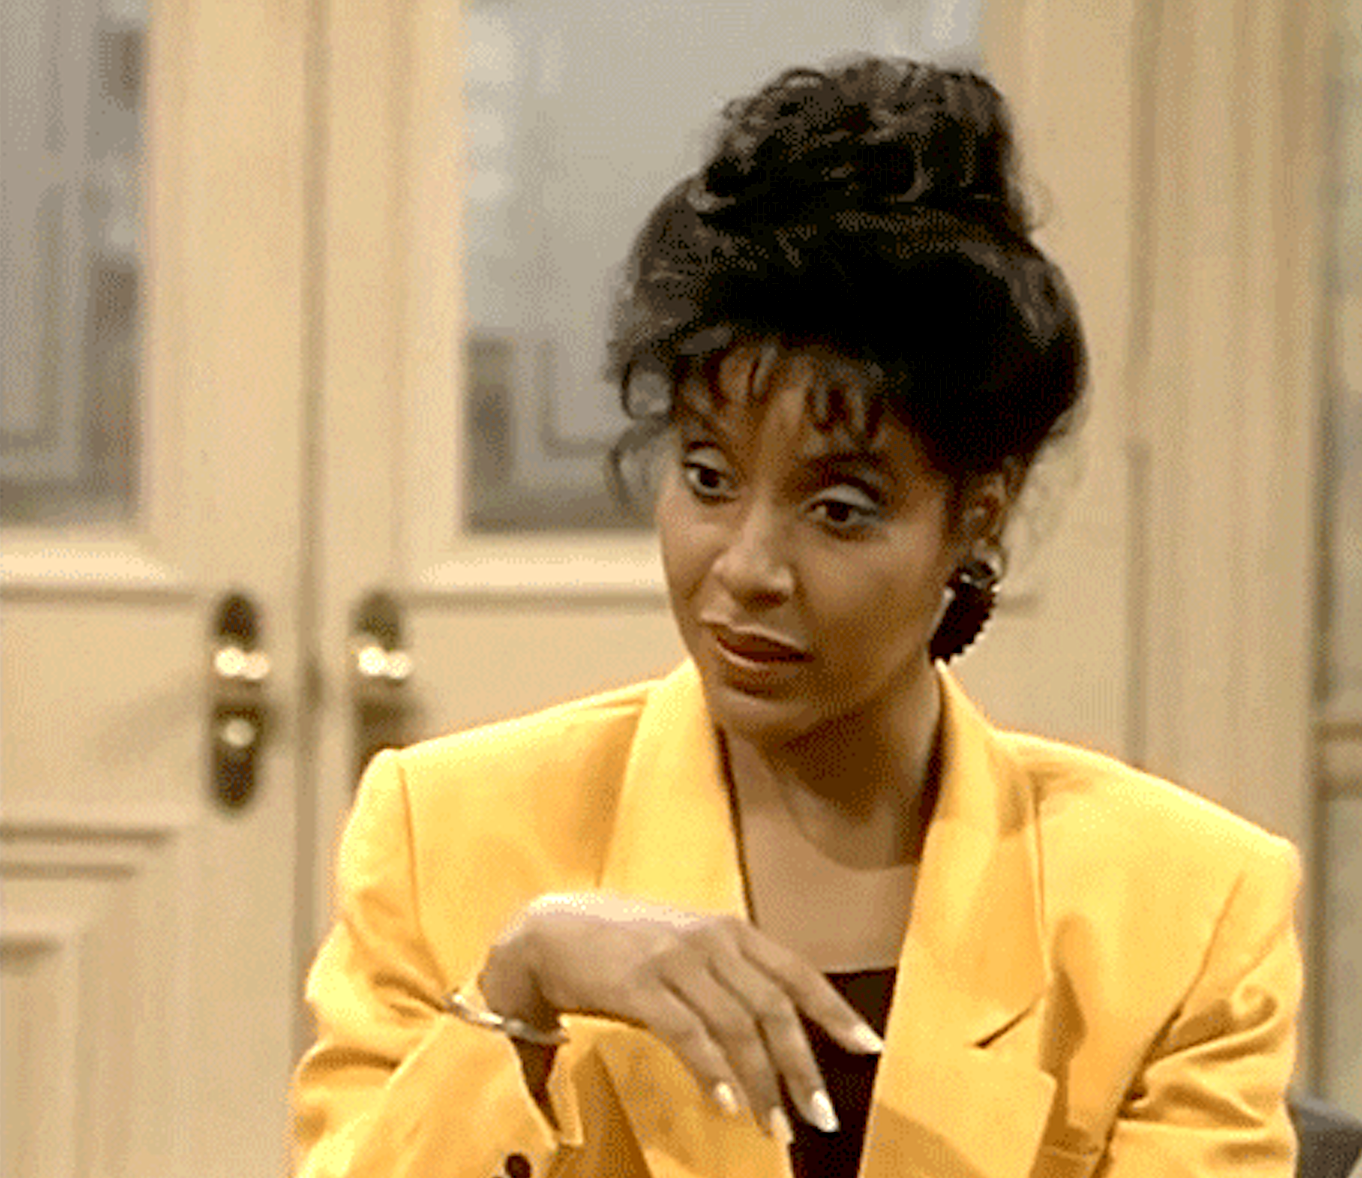 Clair Huxtable looking at someone shocked